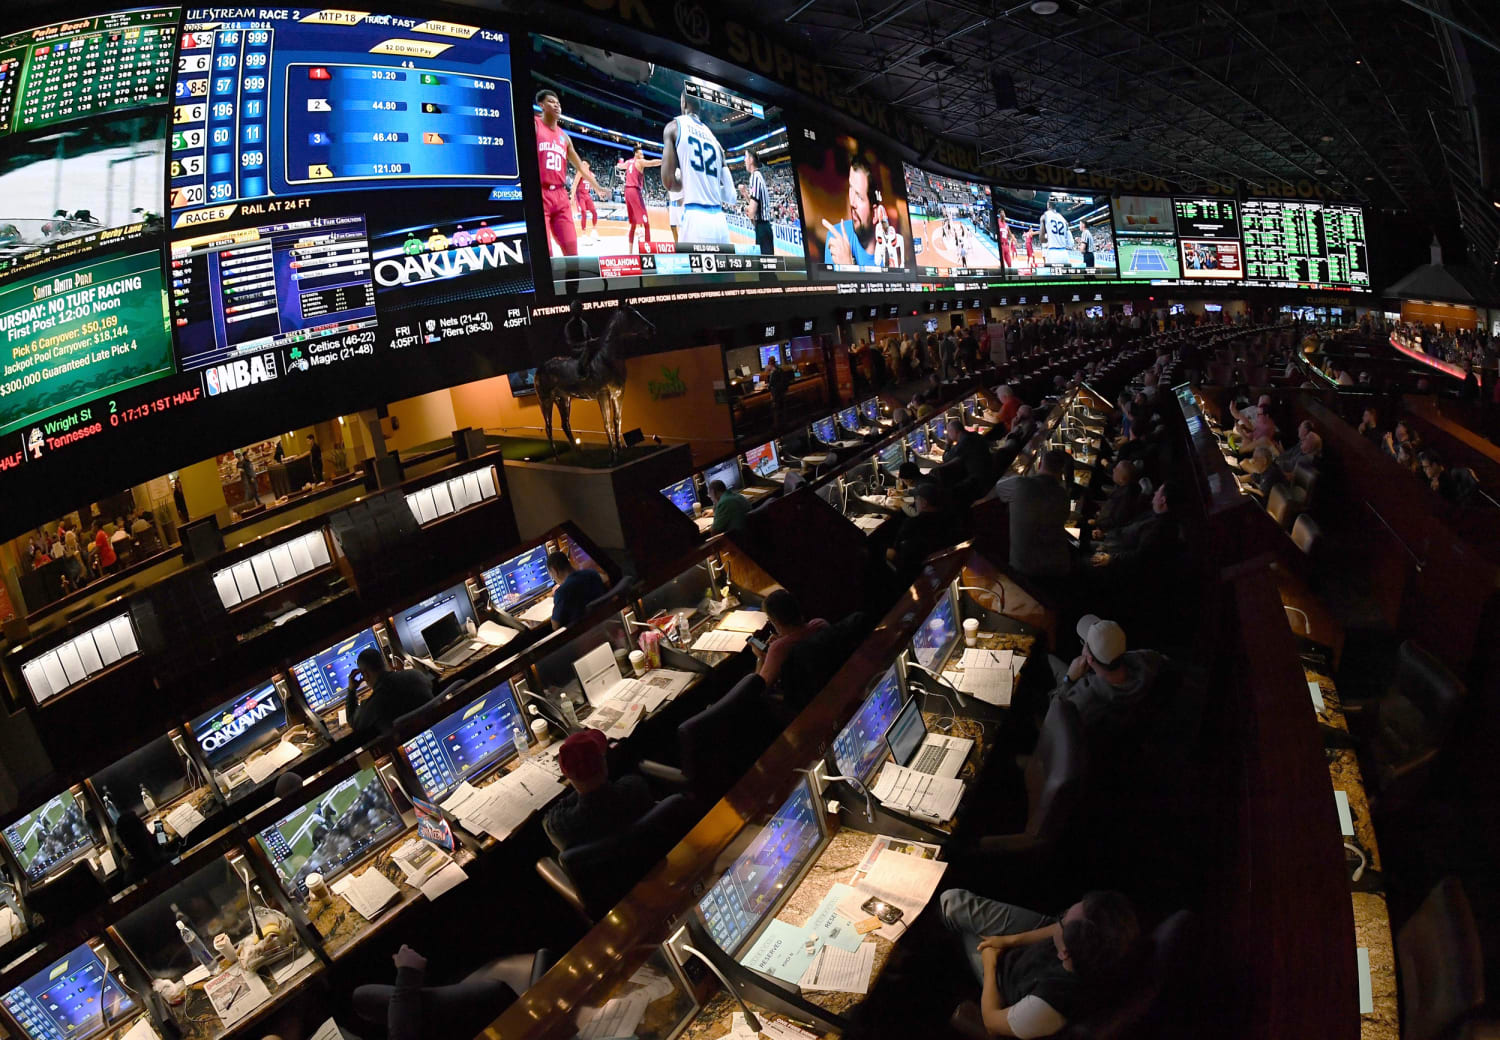 What Do You Want Best Sport Betting Site To Become?